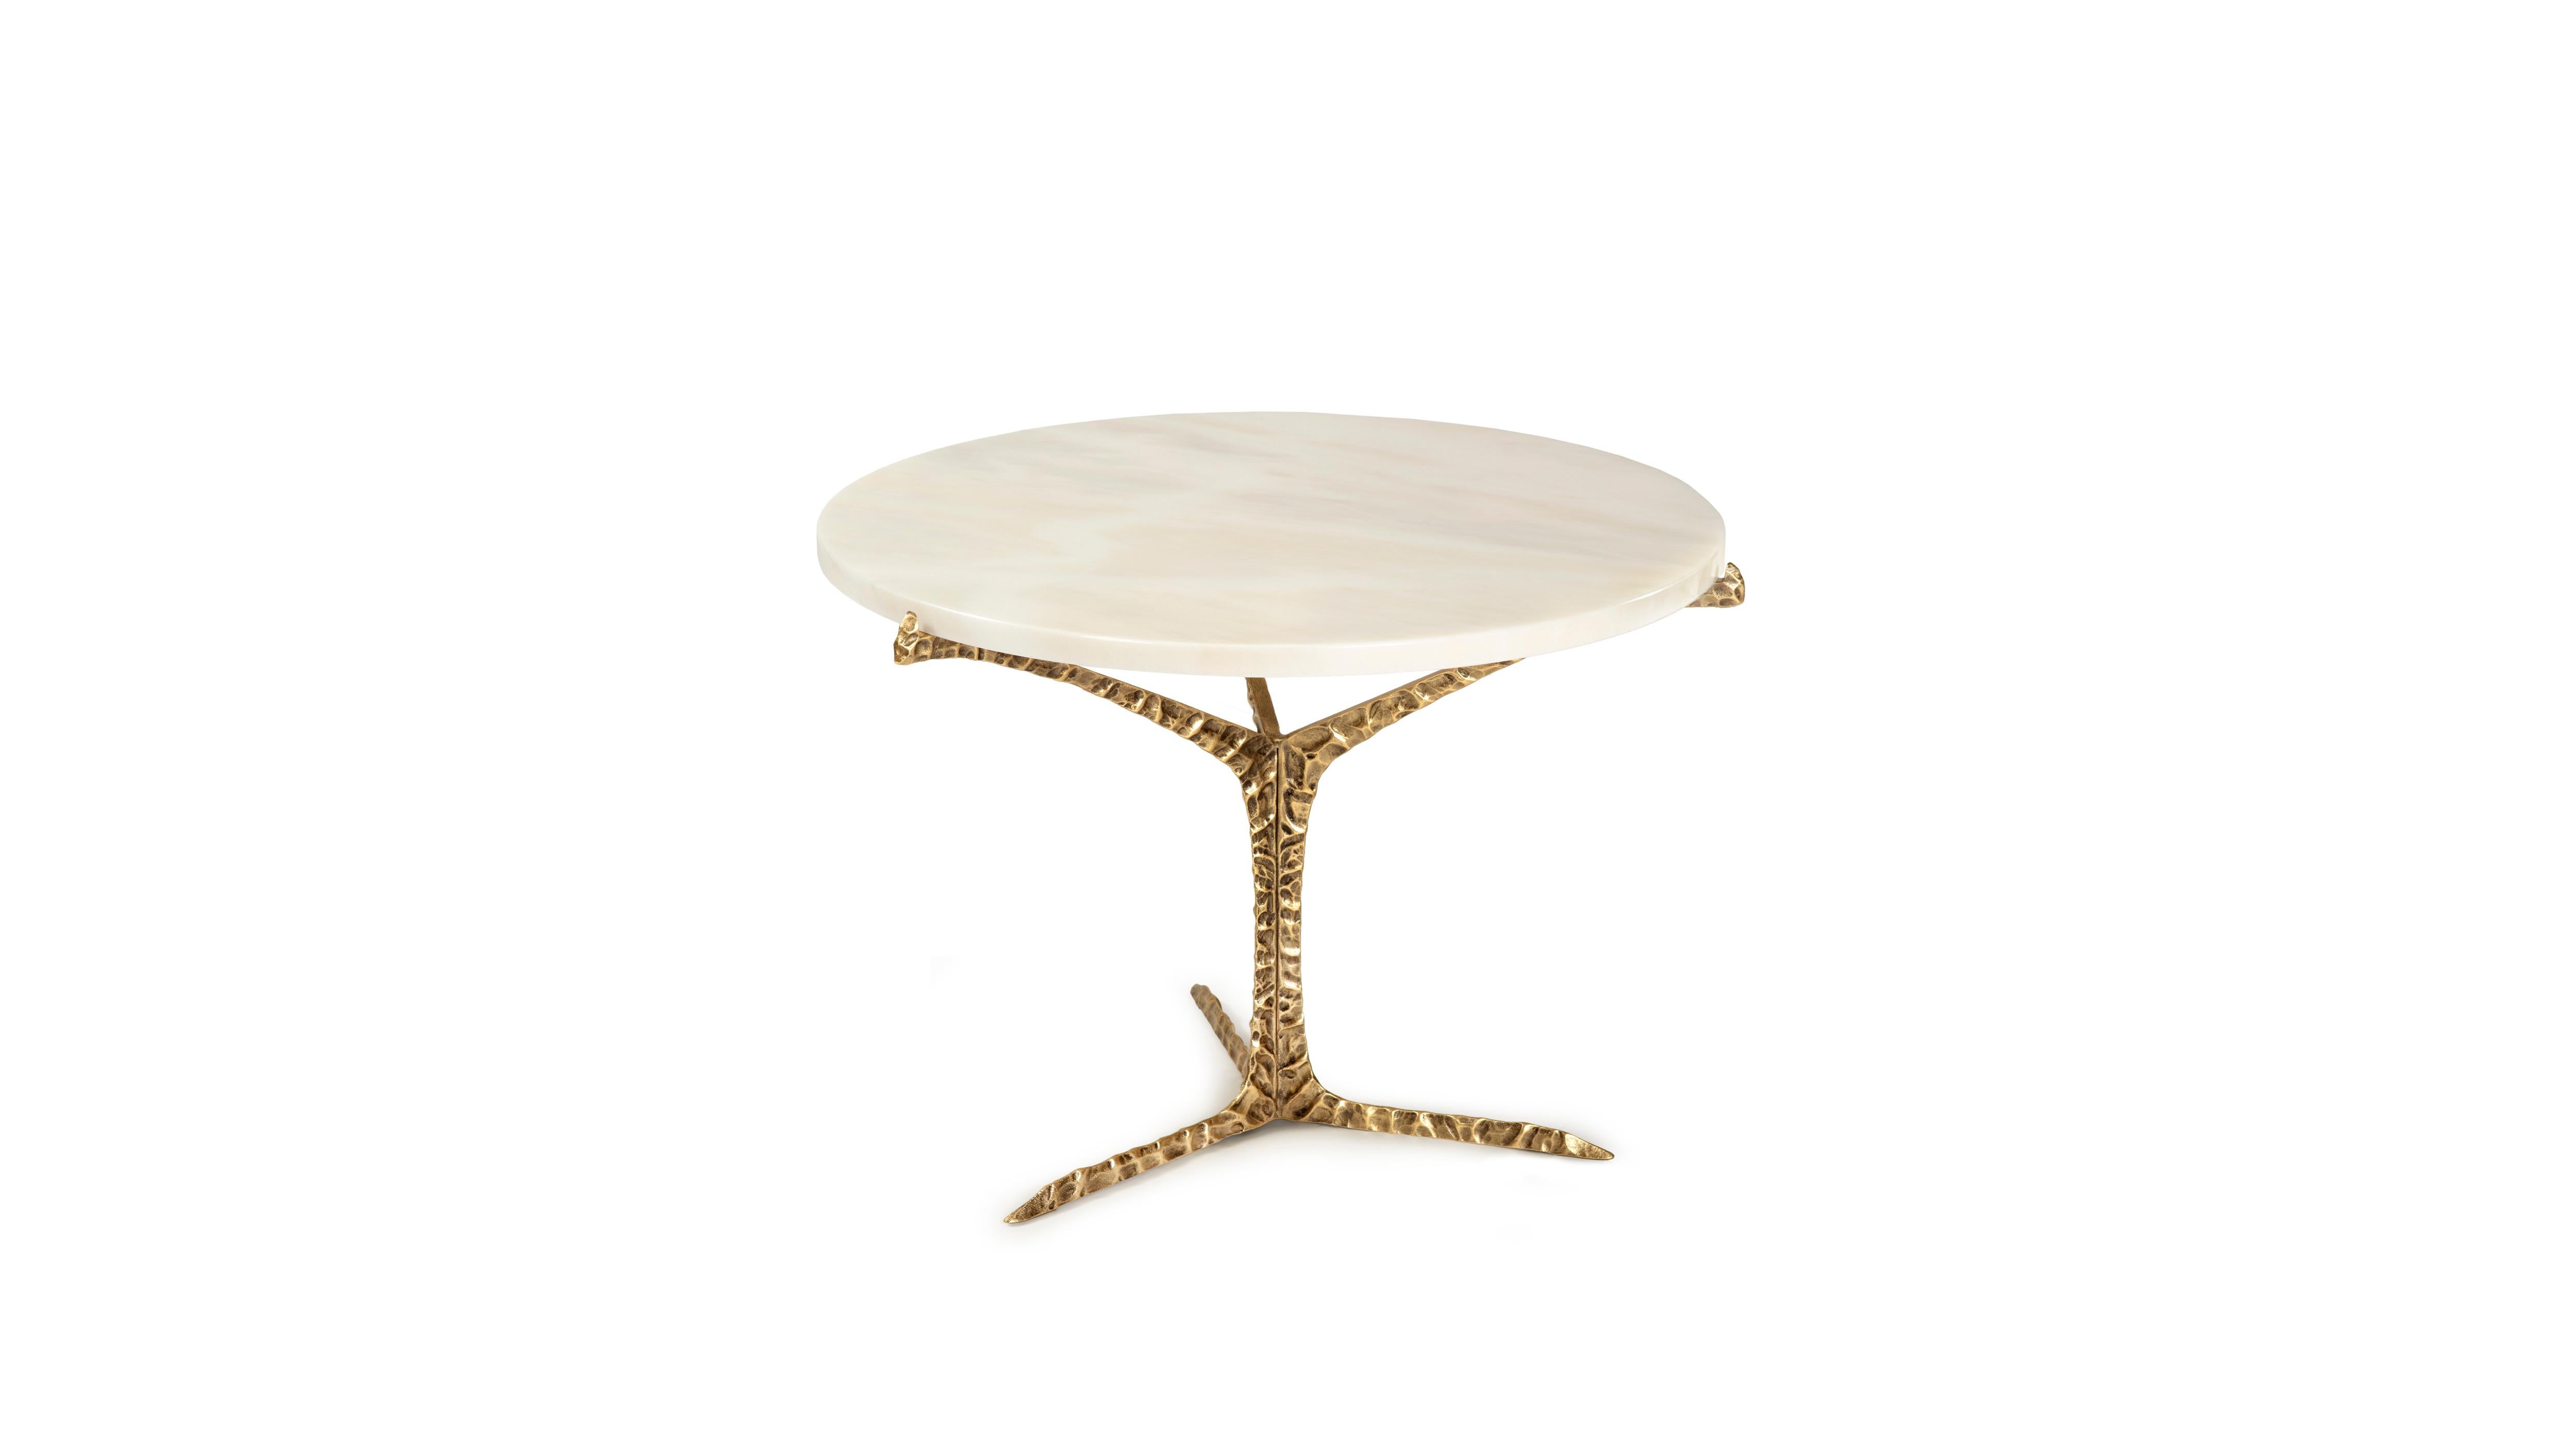 Low Alentejo Estremoz Marble Coffee Table by InsidherLand
Dimensions: D 62 x W 62 x H 42 cm.
Materials: Estremoz marble, cast brass with patinated effect.
17 kg.
Other materials available.

Alentejo tables are a glimpse over the South of Portugal